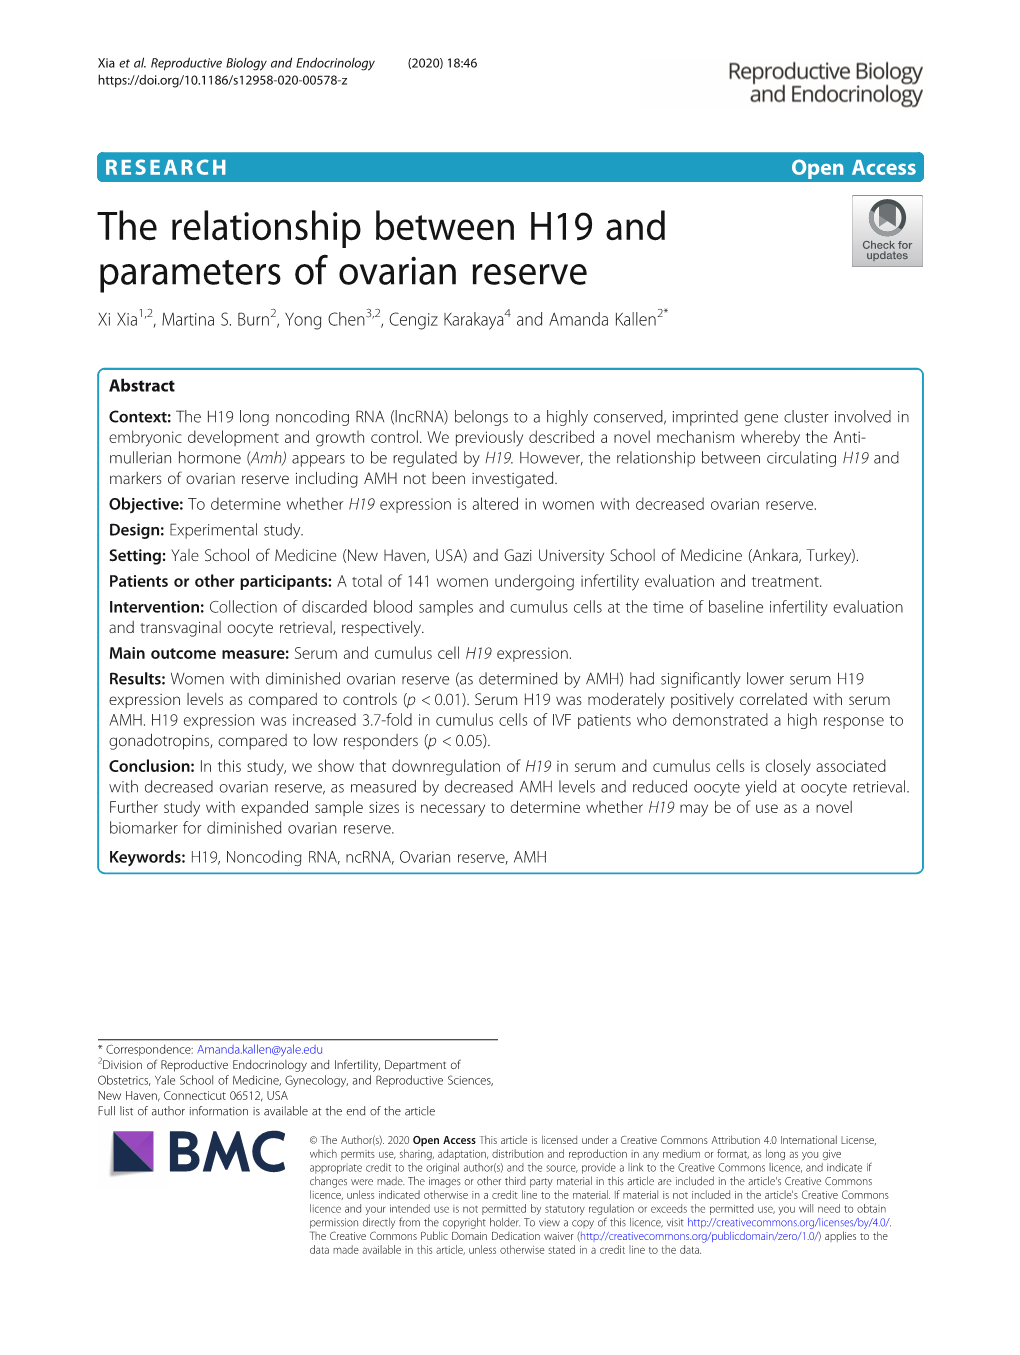 The Relationship Between H19 and Parameters of Ovarian Reserve Xi Xia1,2, Martina S